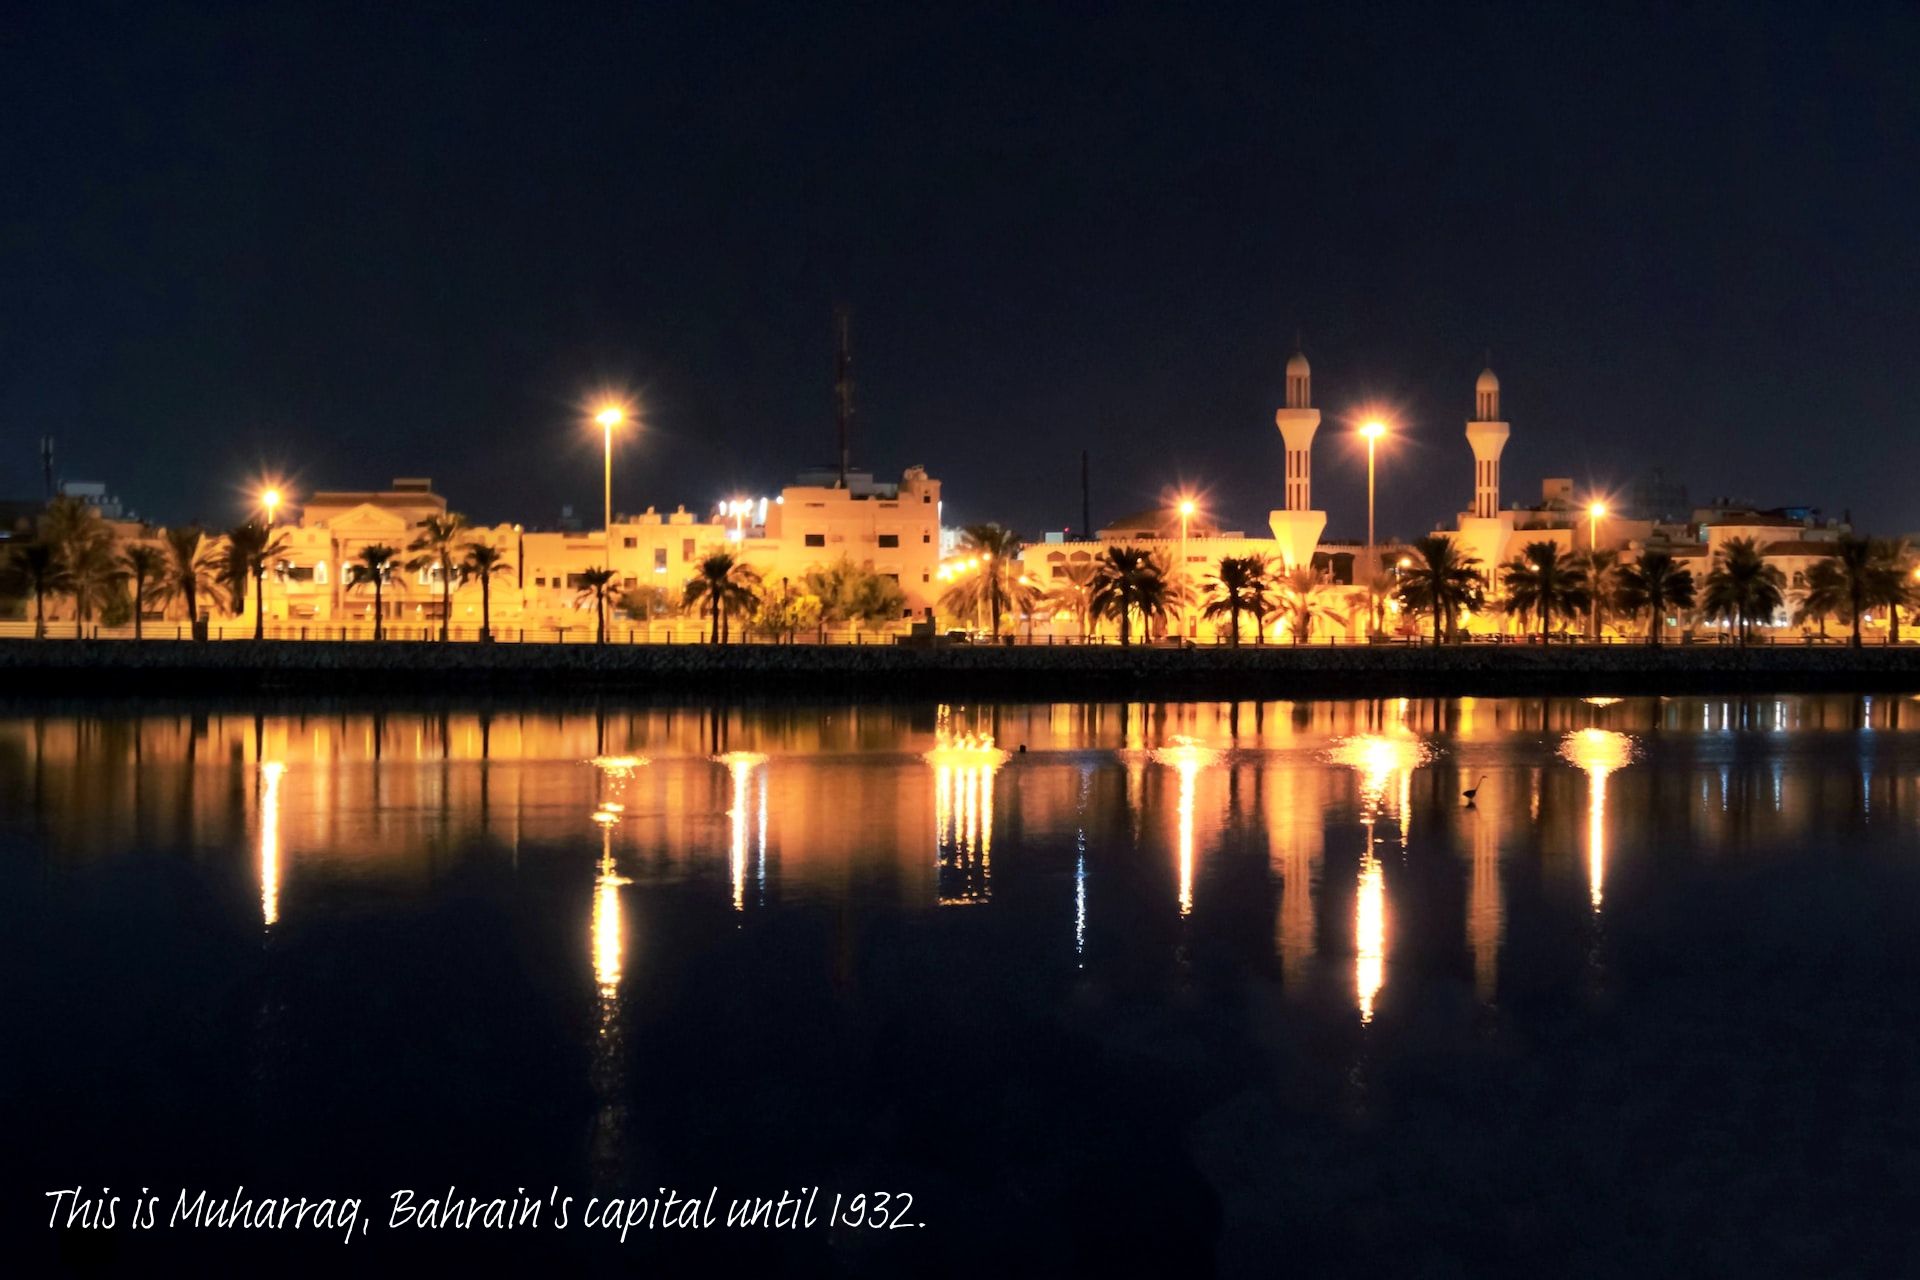 Skyline of Muharraq at night, Bahrain's third largest city and the Capital until 1932.